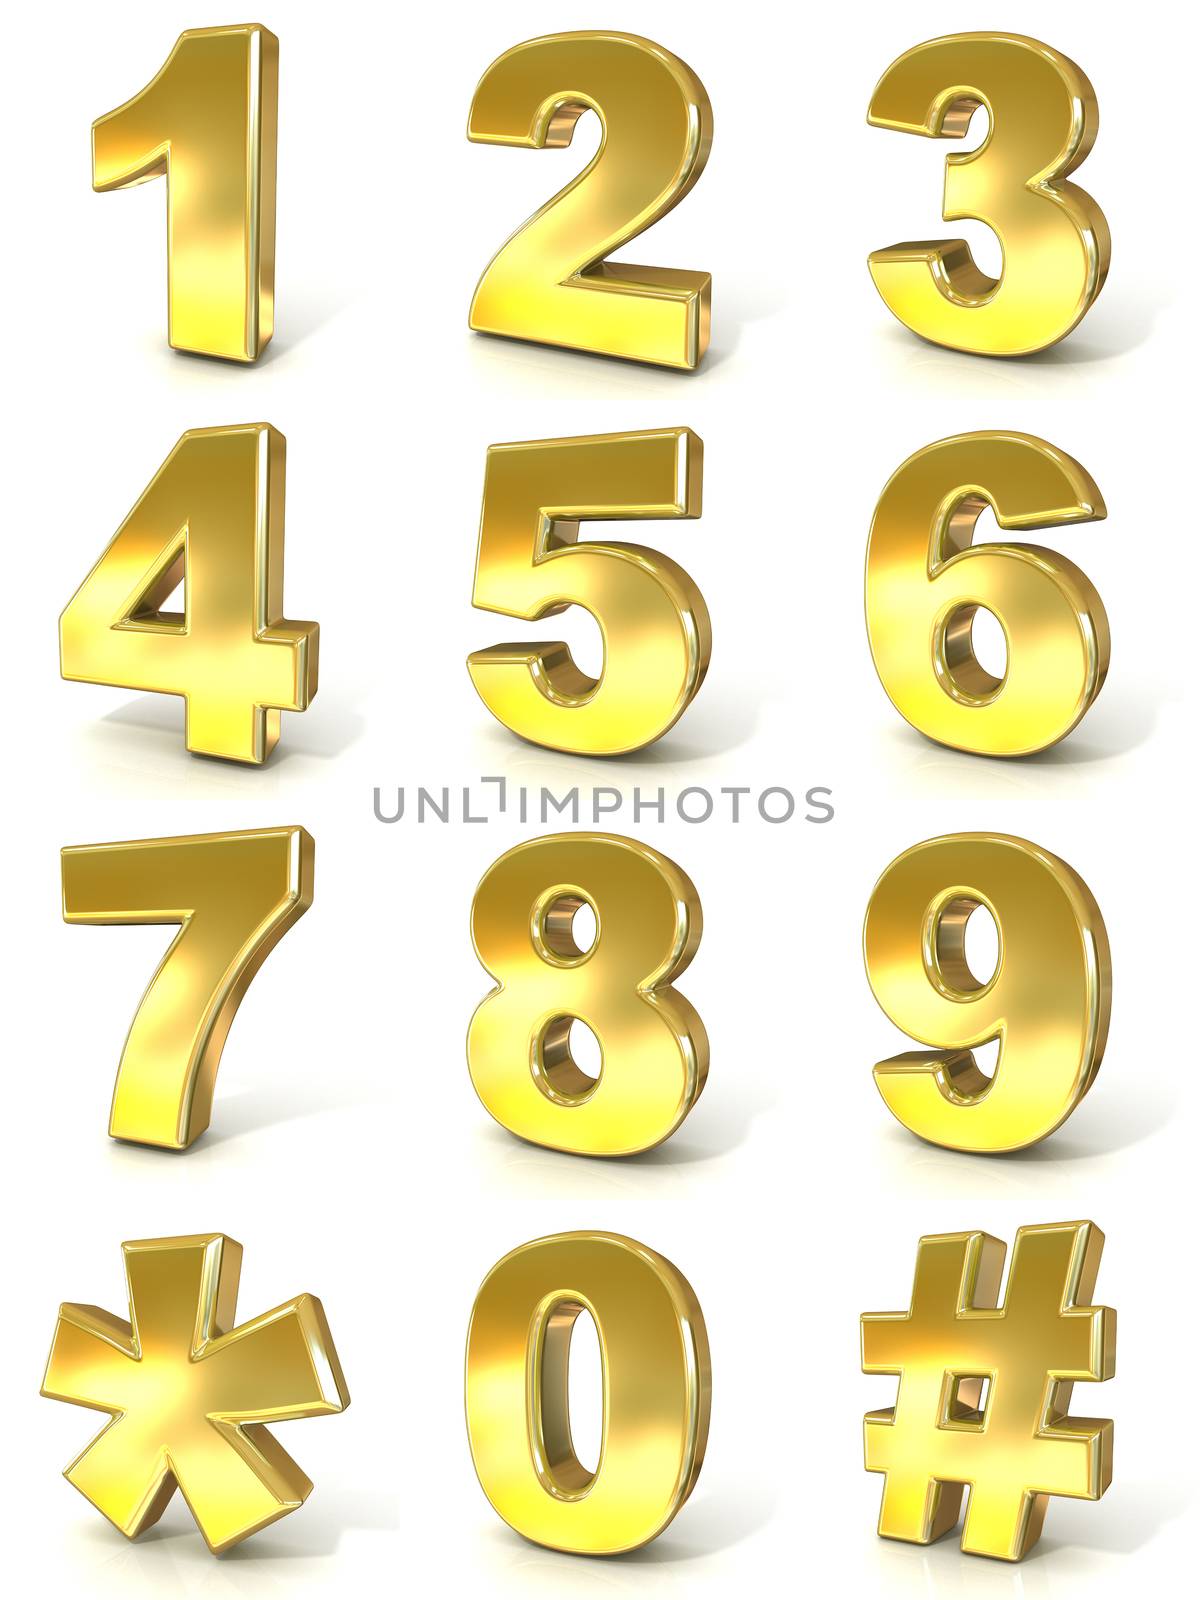 Numerical digits collection, 0 - 9, plus hash tag and asterisk.  by djmilic